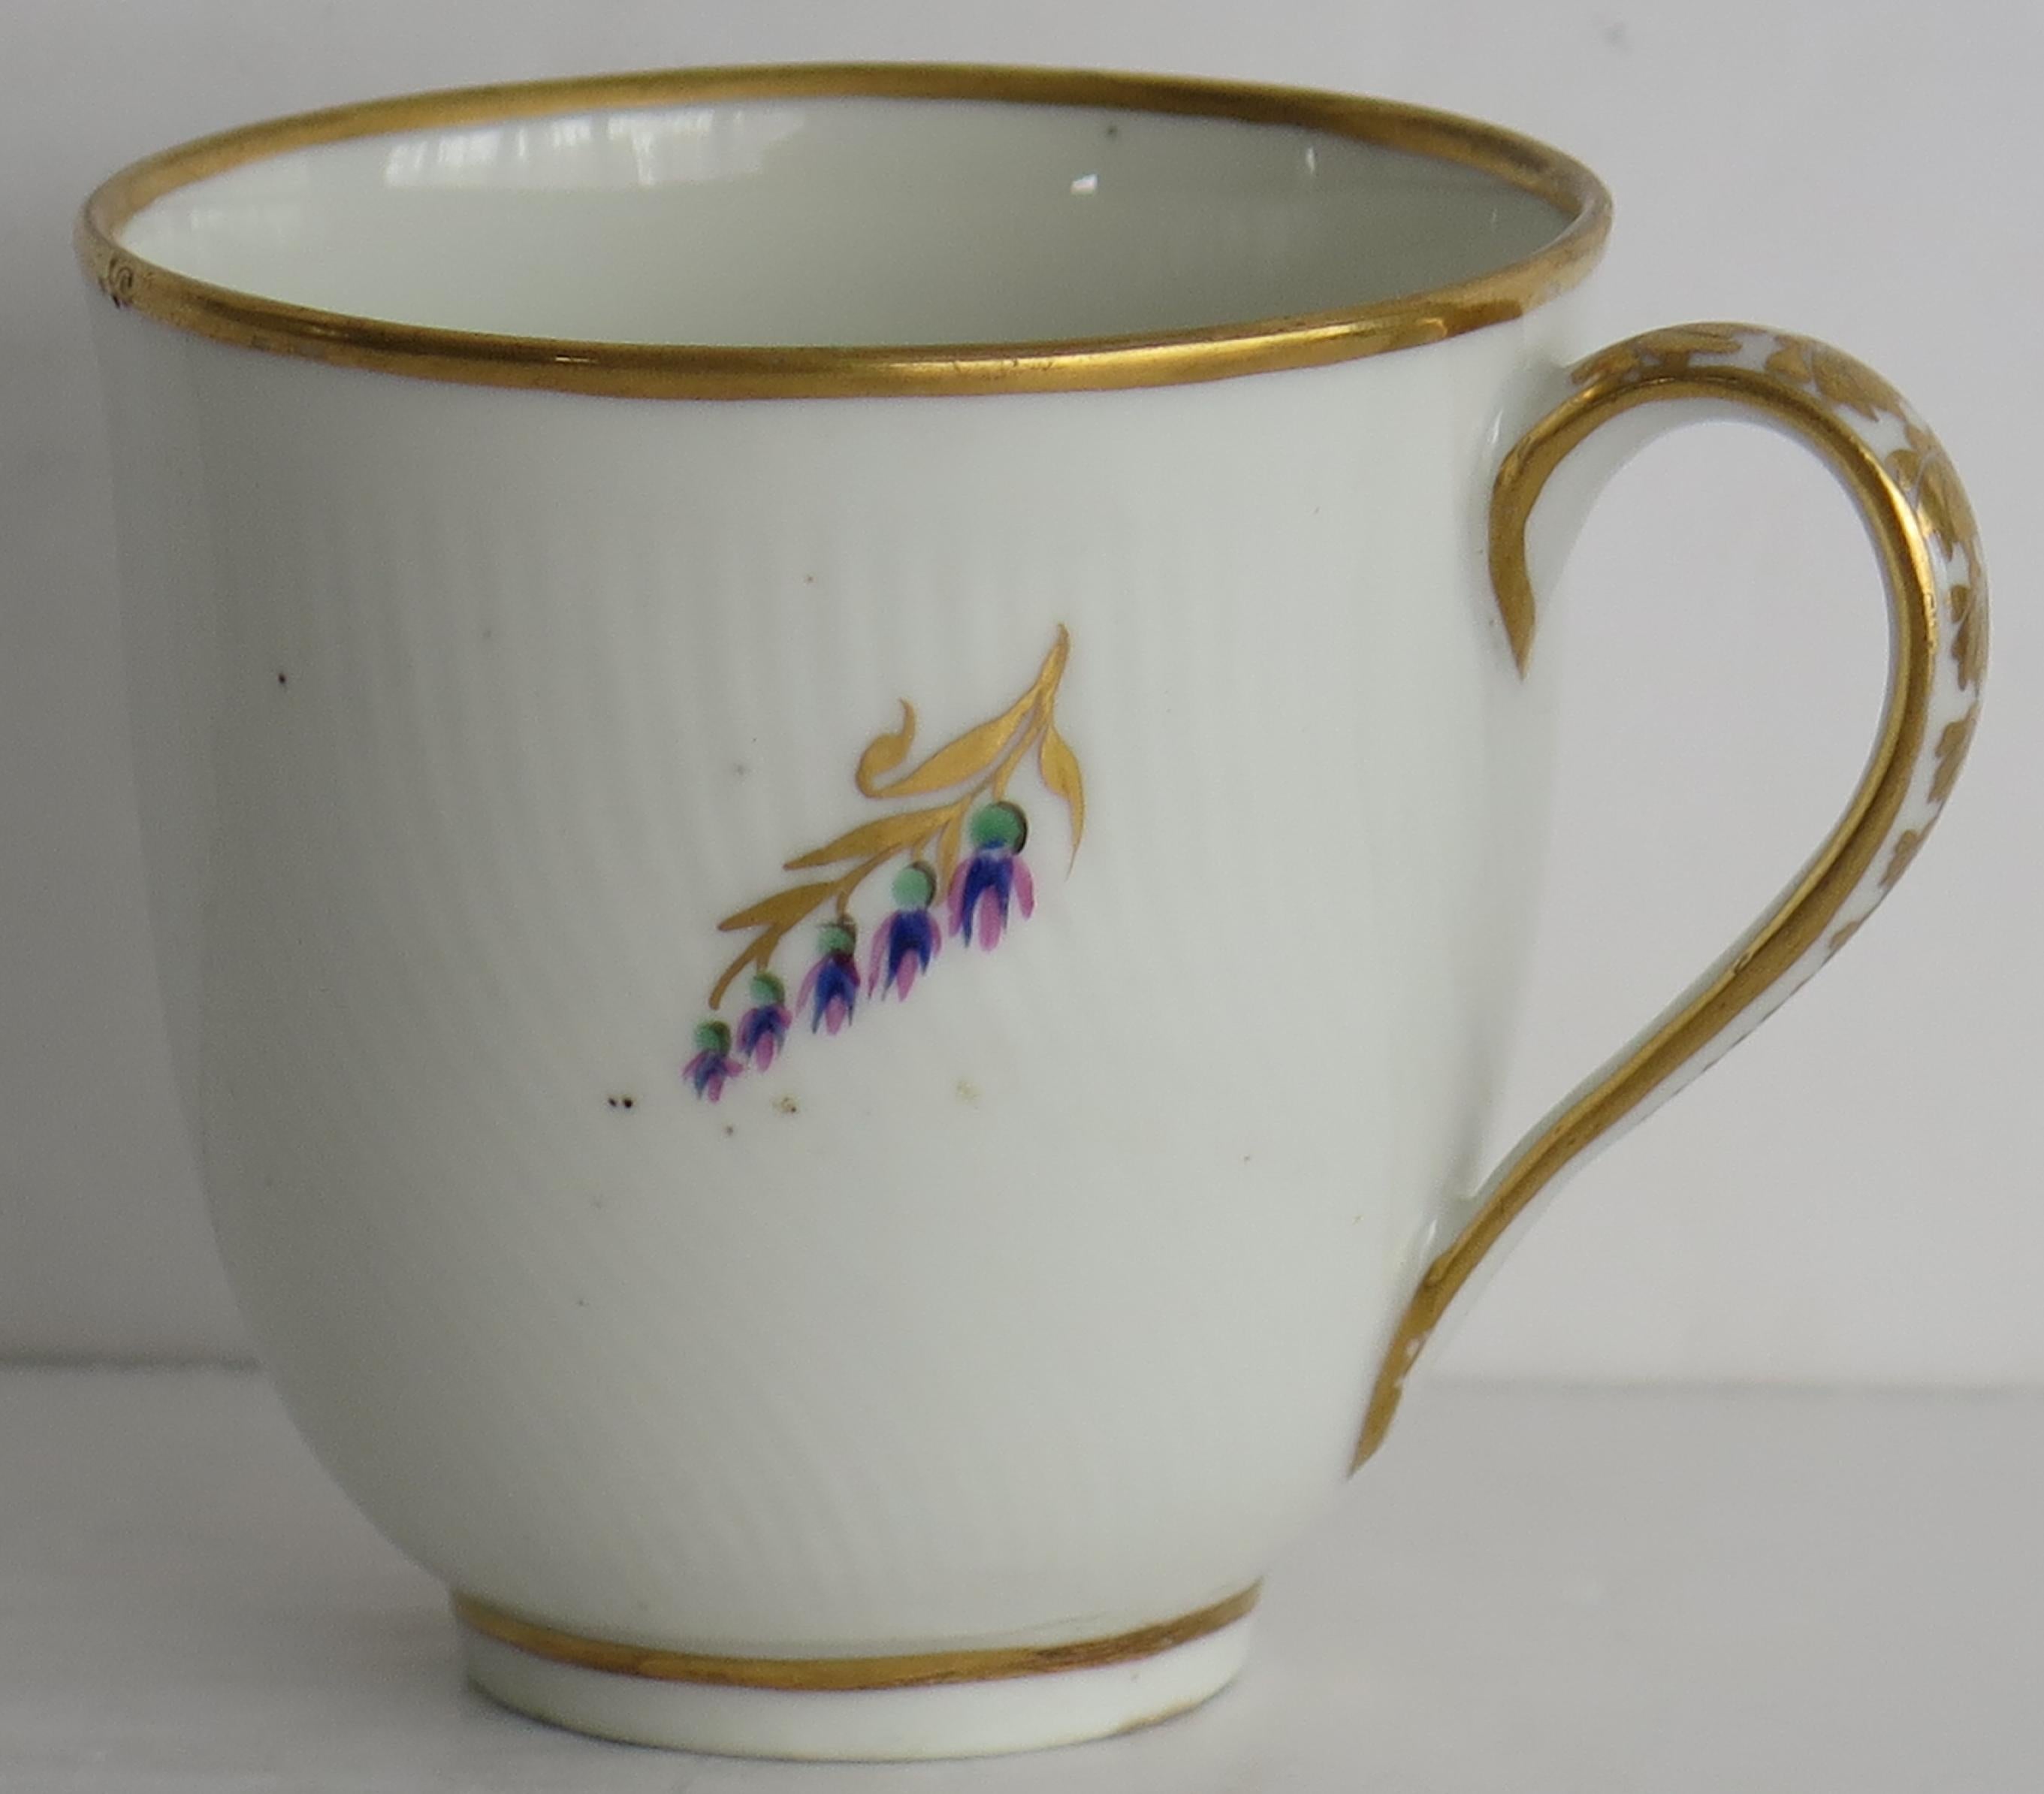 This is a very good early coffee cup by the Derby factory, made in the late 18th century, George 3rd period, circa 1785.

The body of the cup has incised vertical twist flutes and sits on a low foot, with a plain loop handle.

It is beautifully